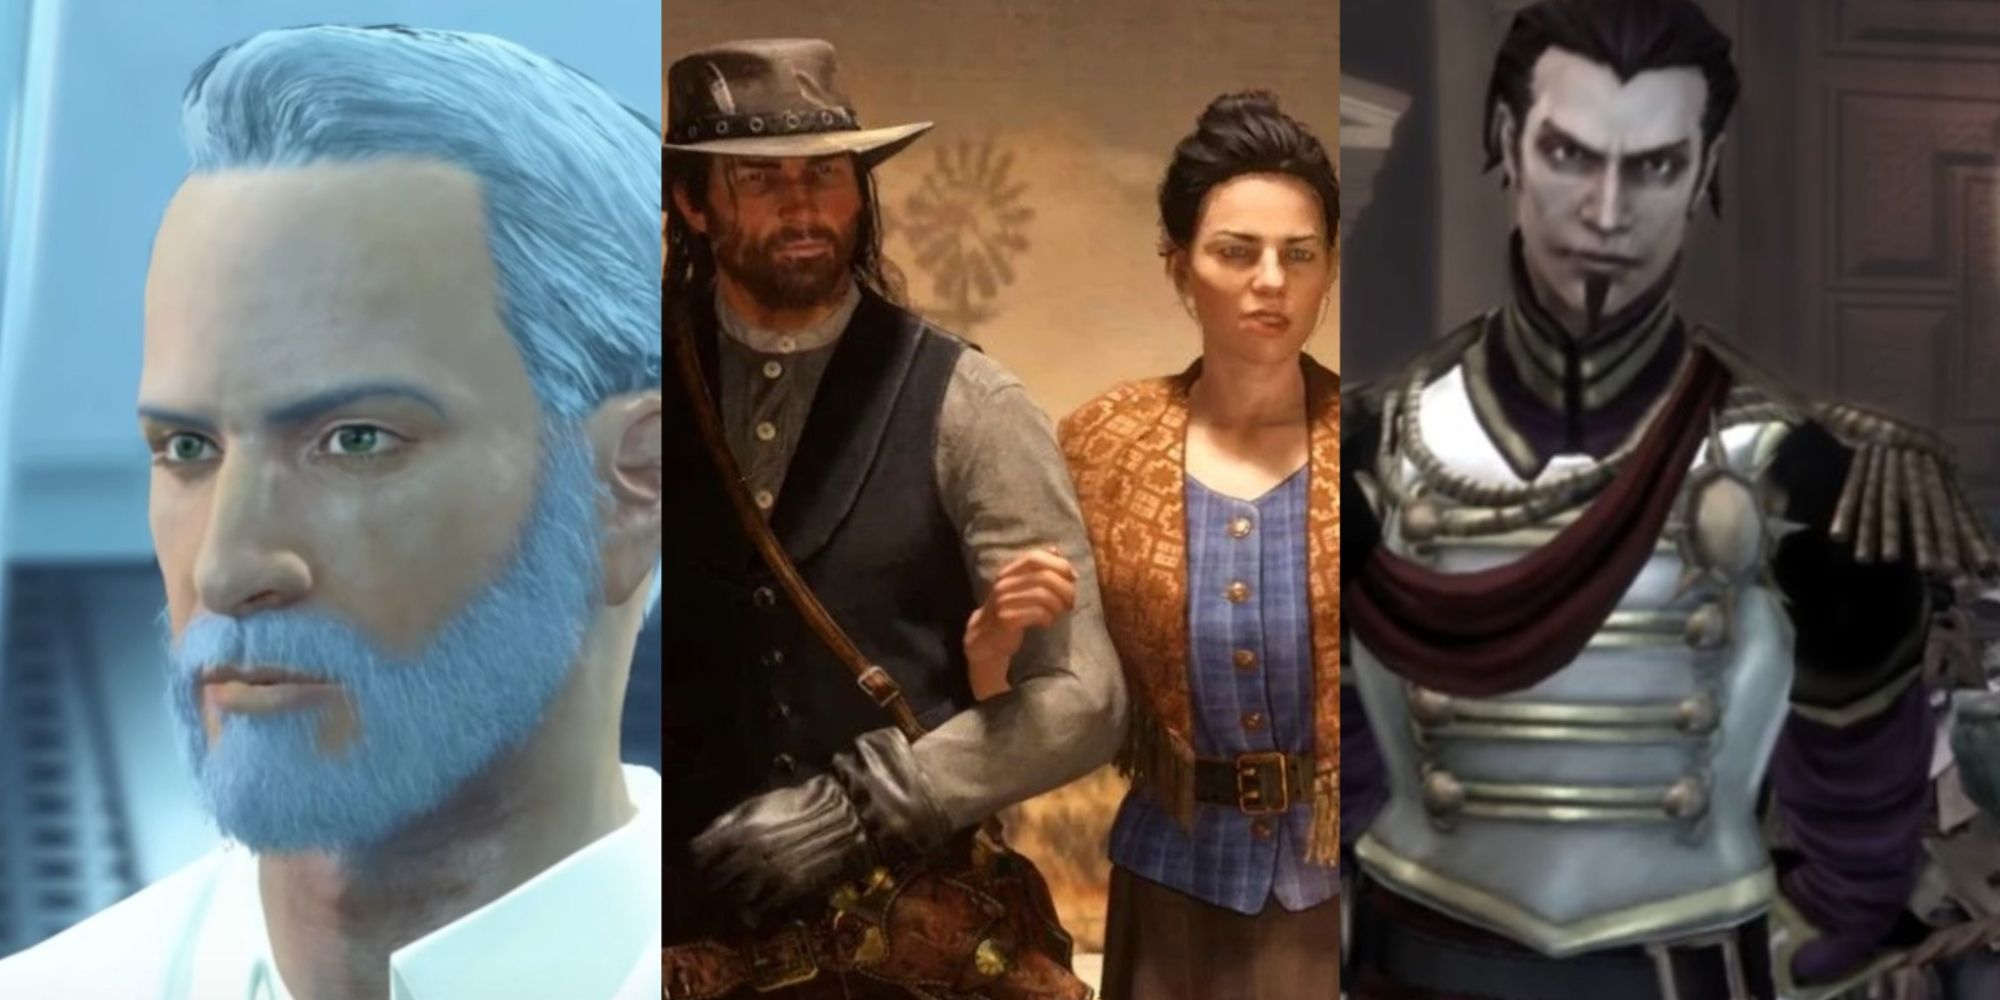 Games Stories That Change Partway Through Featured Split Image Fallout 4, Red Dead Redemption 2, And Fable 3